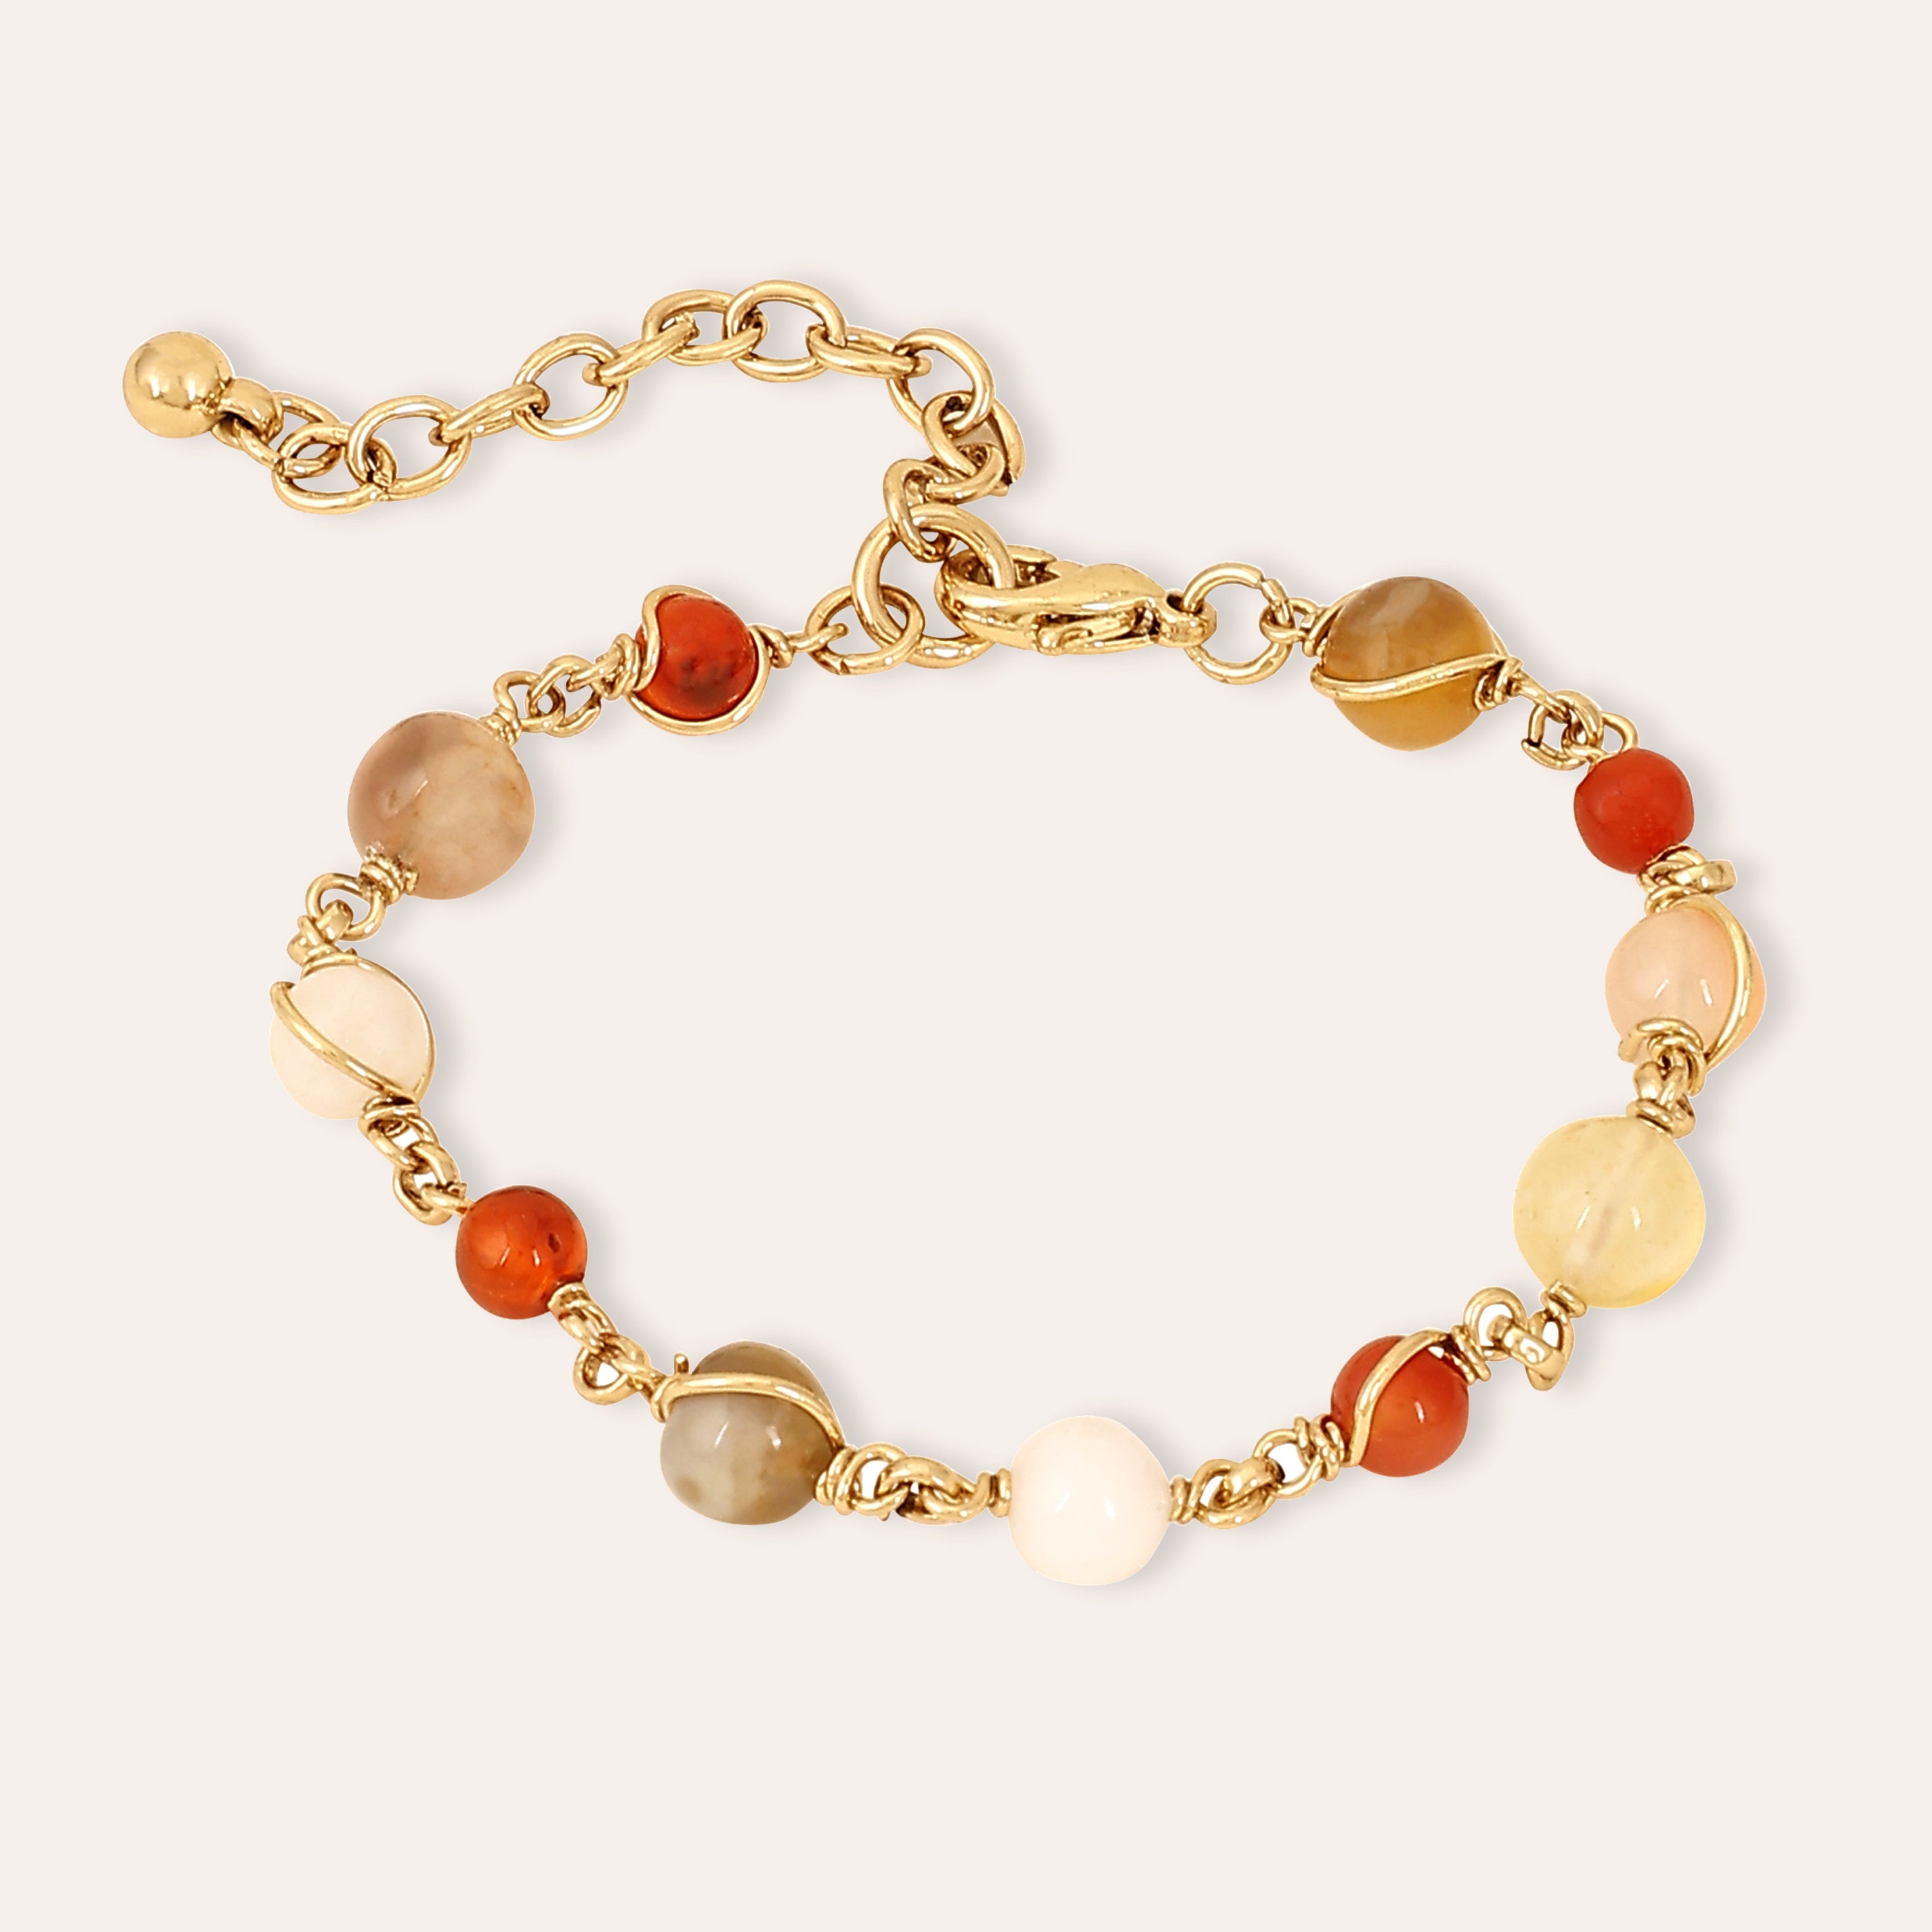 TFC Delicate Beads Gold Plated Bracelet-Discover our stunning collection of stylish bracelets for women, featuring exquisite pearl bracelets, handcrafted beaded bracelets, and elegant gold-plated designs. Enjoy cheapest anti-tarnish fashion jewellery and long-lasting brilliance only at The Fun Company